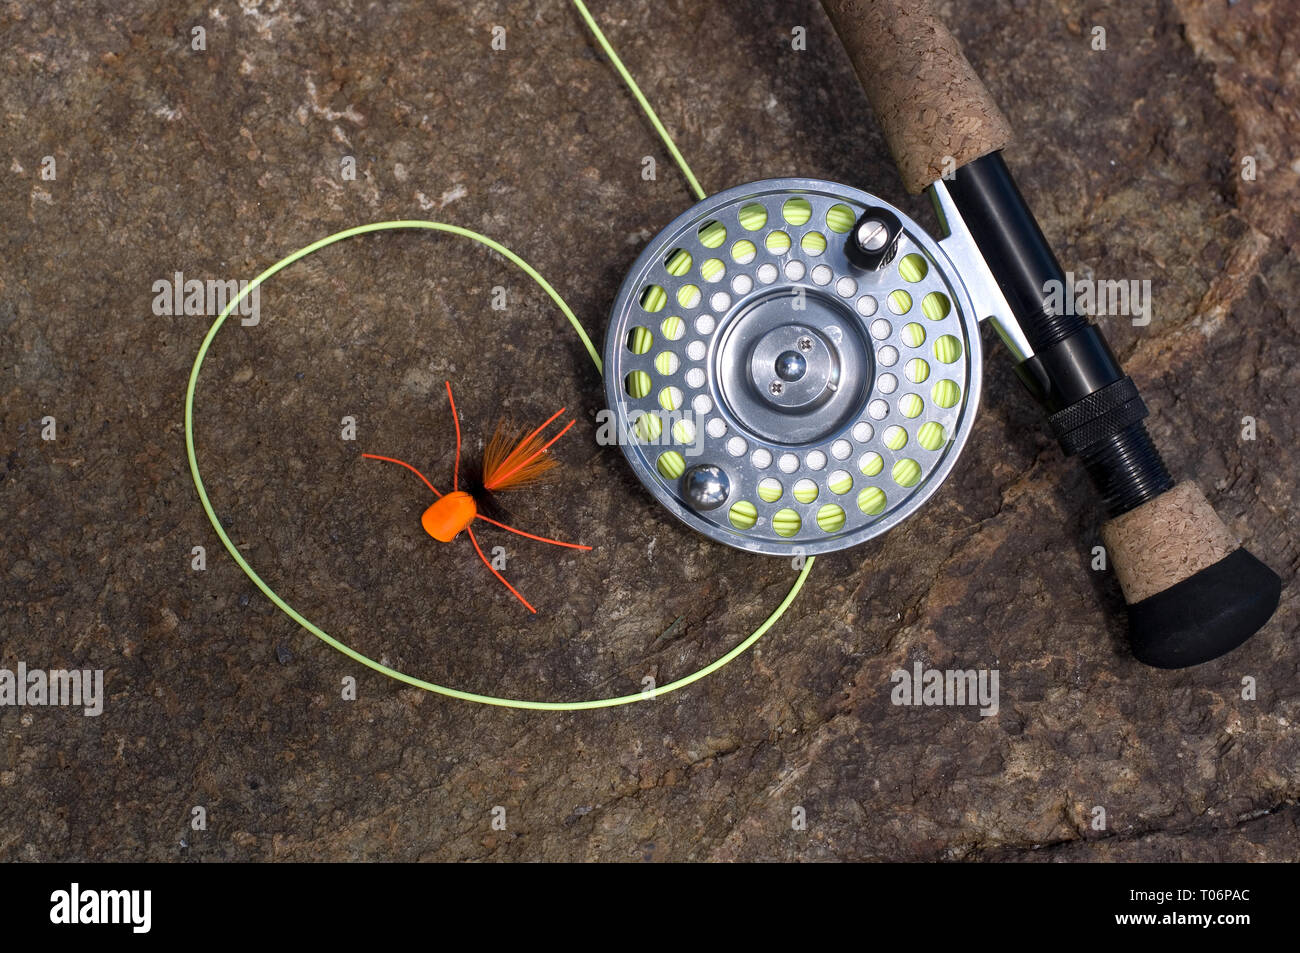 Fly fishing Rod and Reel with Orange Spider Lure on Wet Rocks Stock Photo -  Alamy